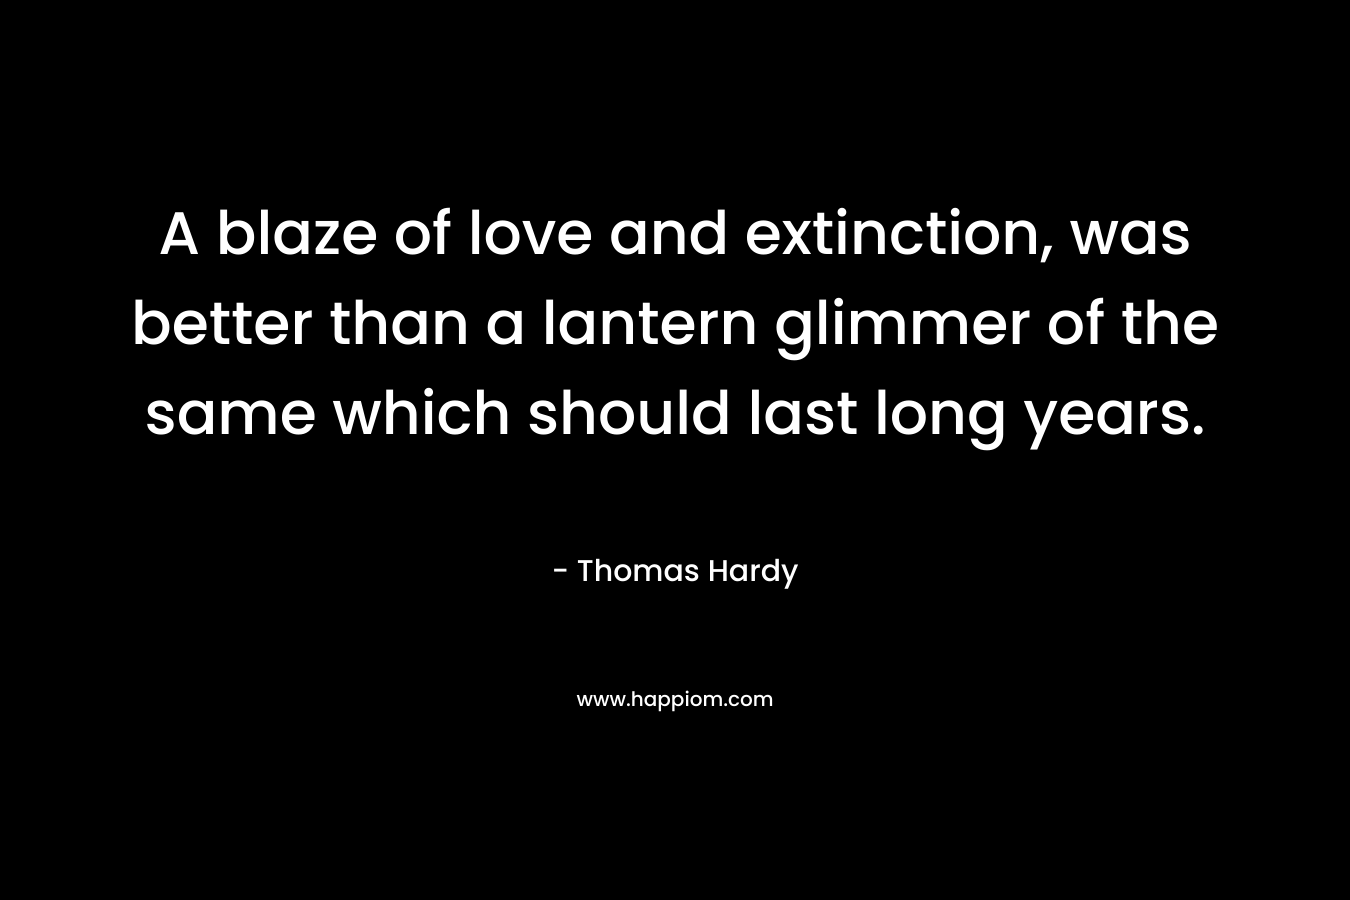 A blaze of love and extinction, was better than a lantern glimmer of the same which should last long years. – Thomas Hardy